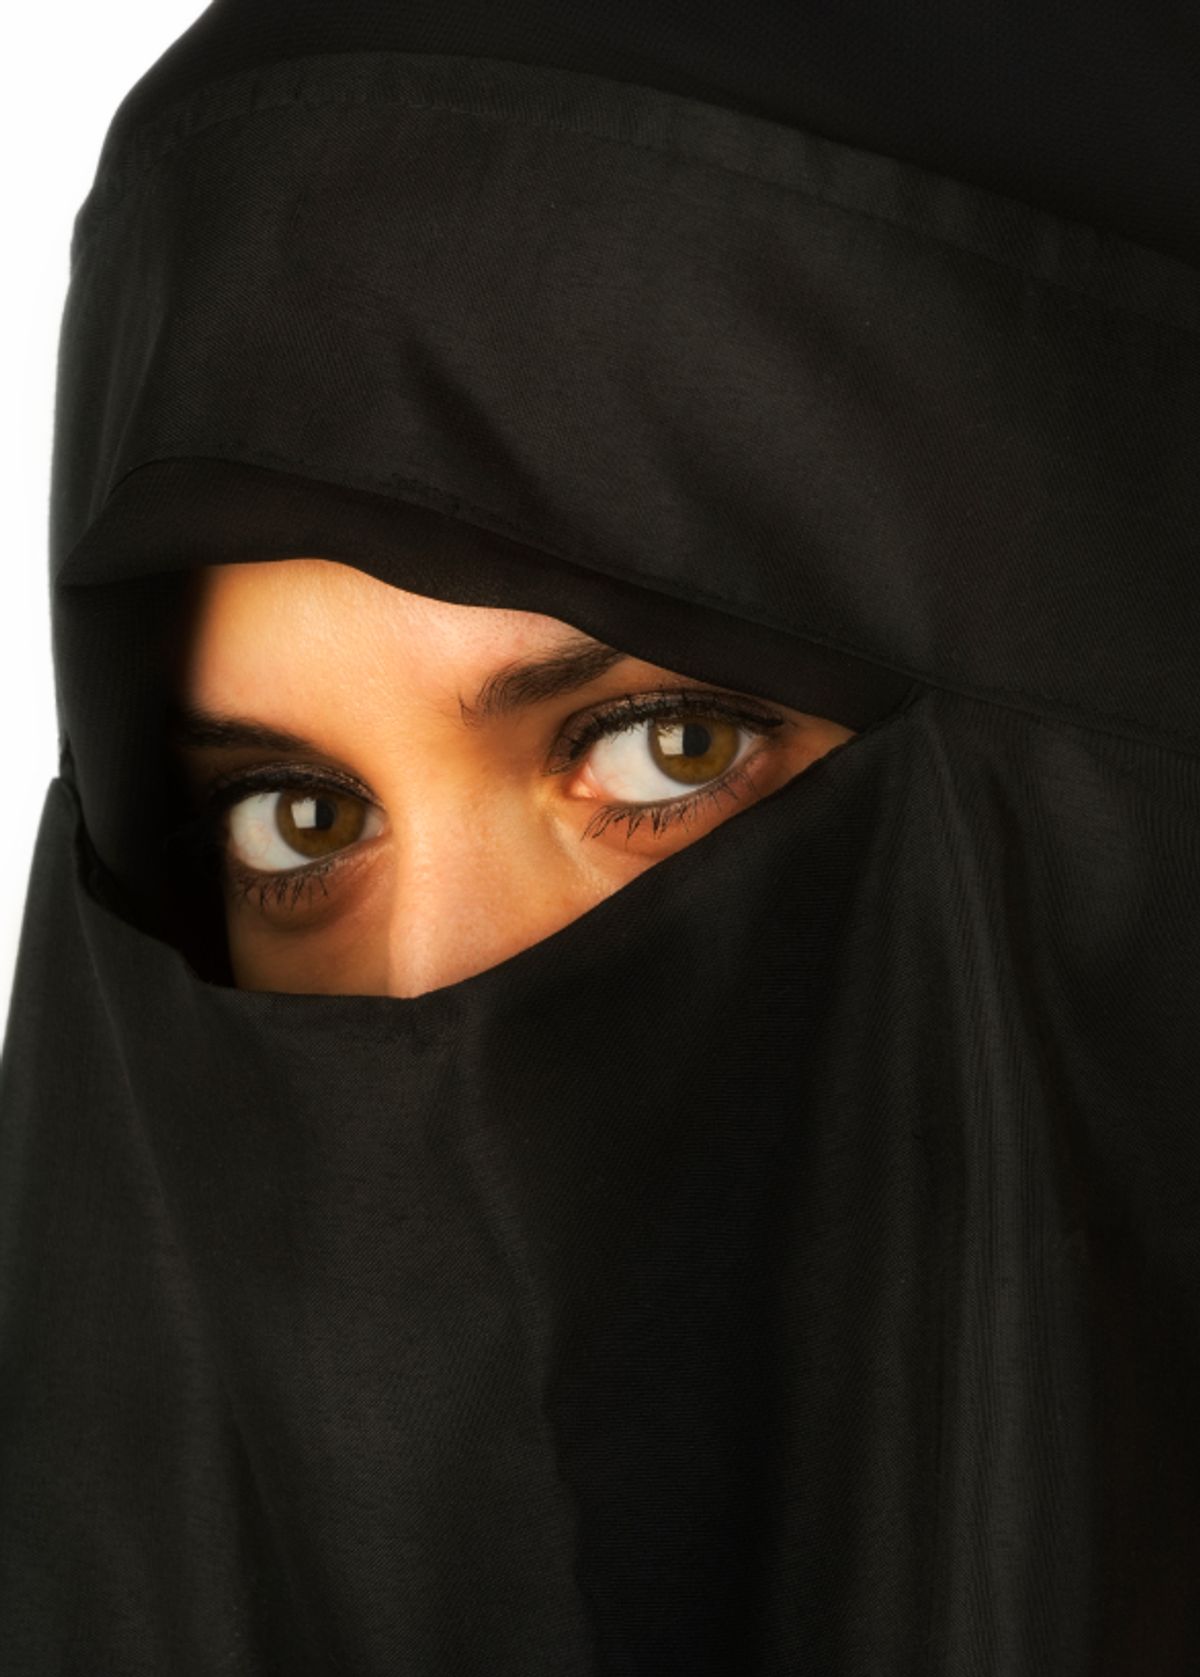 Beautiful Middle eastern woman in niqab traditional veil isolated against a white background